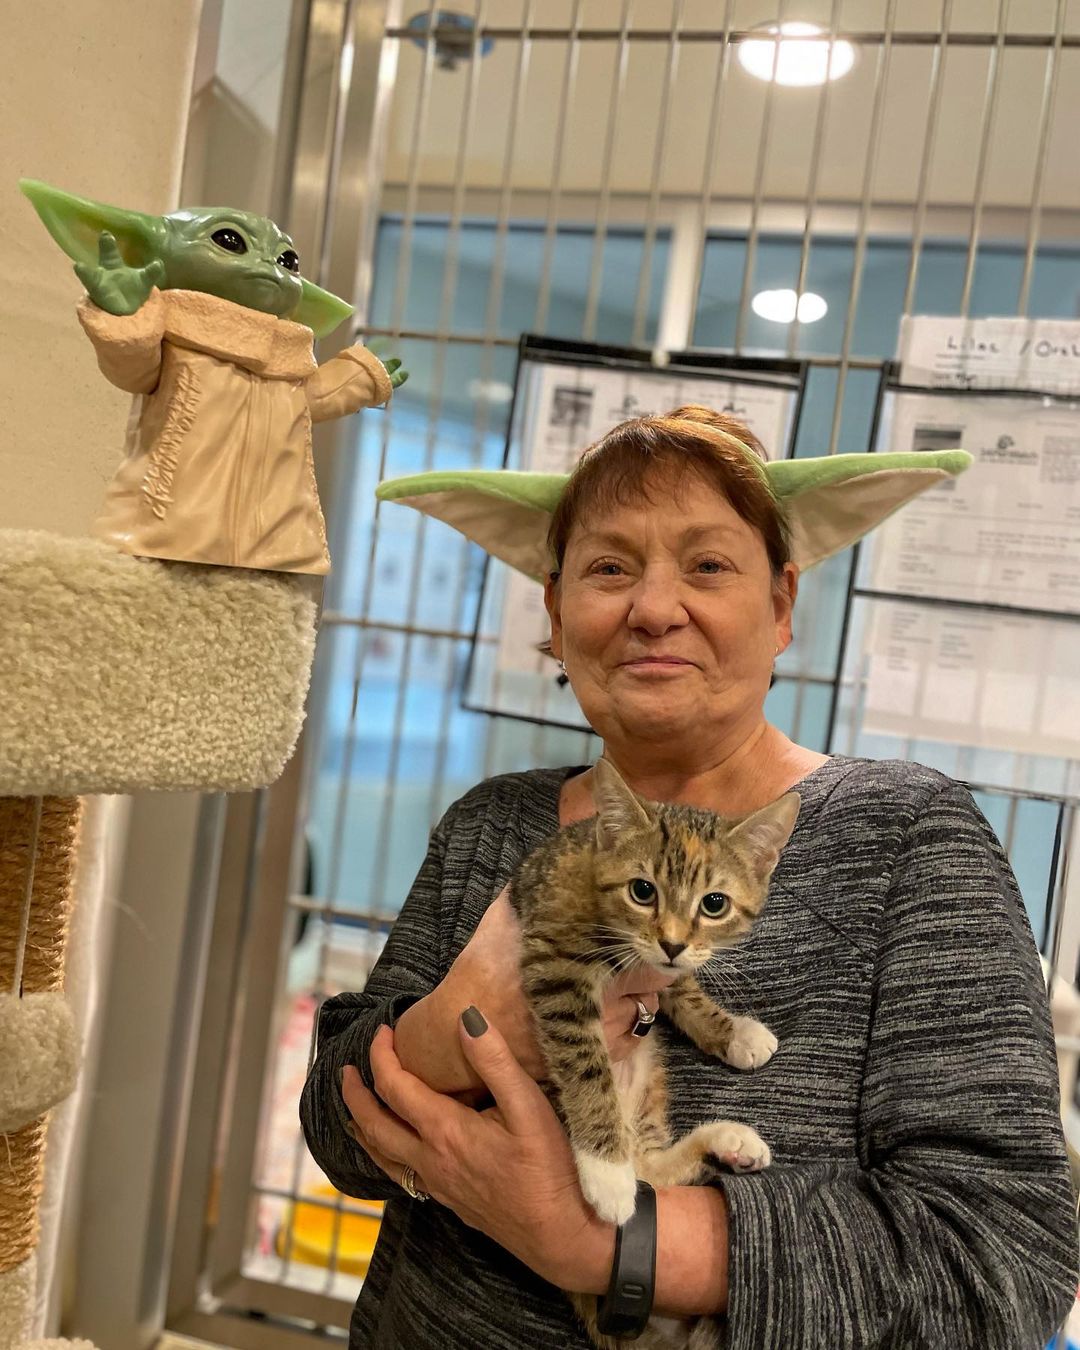 The force is strong with our furry younglings ✨

Kitten season never really let up here at Pet Helpers. We’re still seeing tiny paws coming into our shelter from all across the galaxy each day. With winter approaching, adoptions are needed more than ever so we can continue to bring in homeless fur babies away from the increasingly harsh conditions outside. ❄️

We’re open for walk-in adoptions this week from 12-6; stop by and meet kittens so cute they put Baby Yoda to shame 💚

We are in desperate need of dry cat food to maintain our community food bank and cat colonies we administer to. You can save lives without adopting by donating dry cat food either in person during shelter hours or by following the link in our bio to donate through our @chewy wishlist 💙